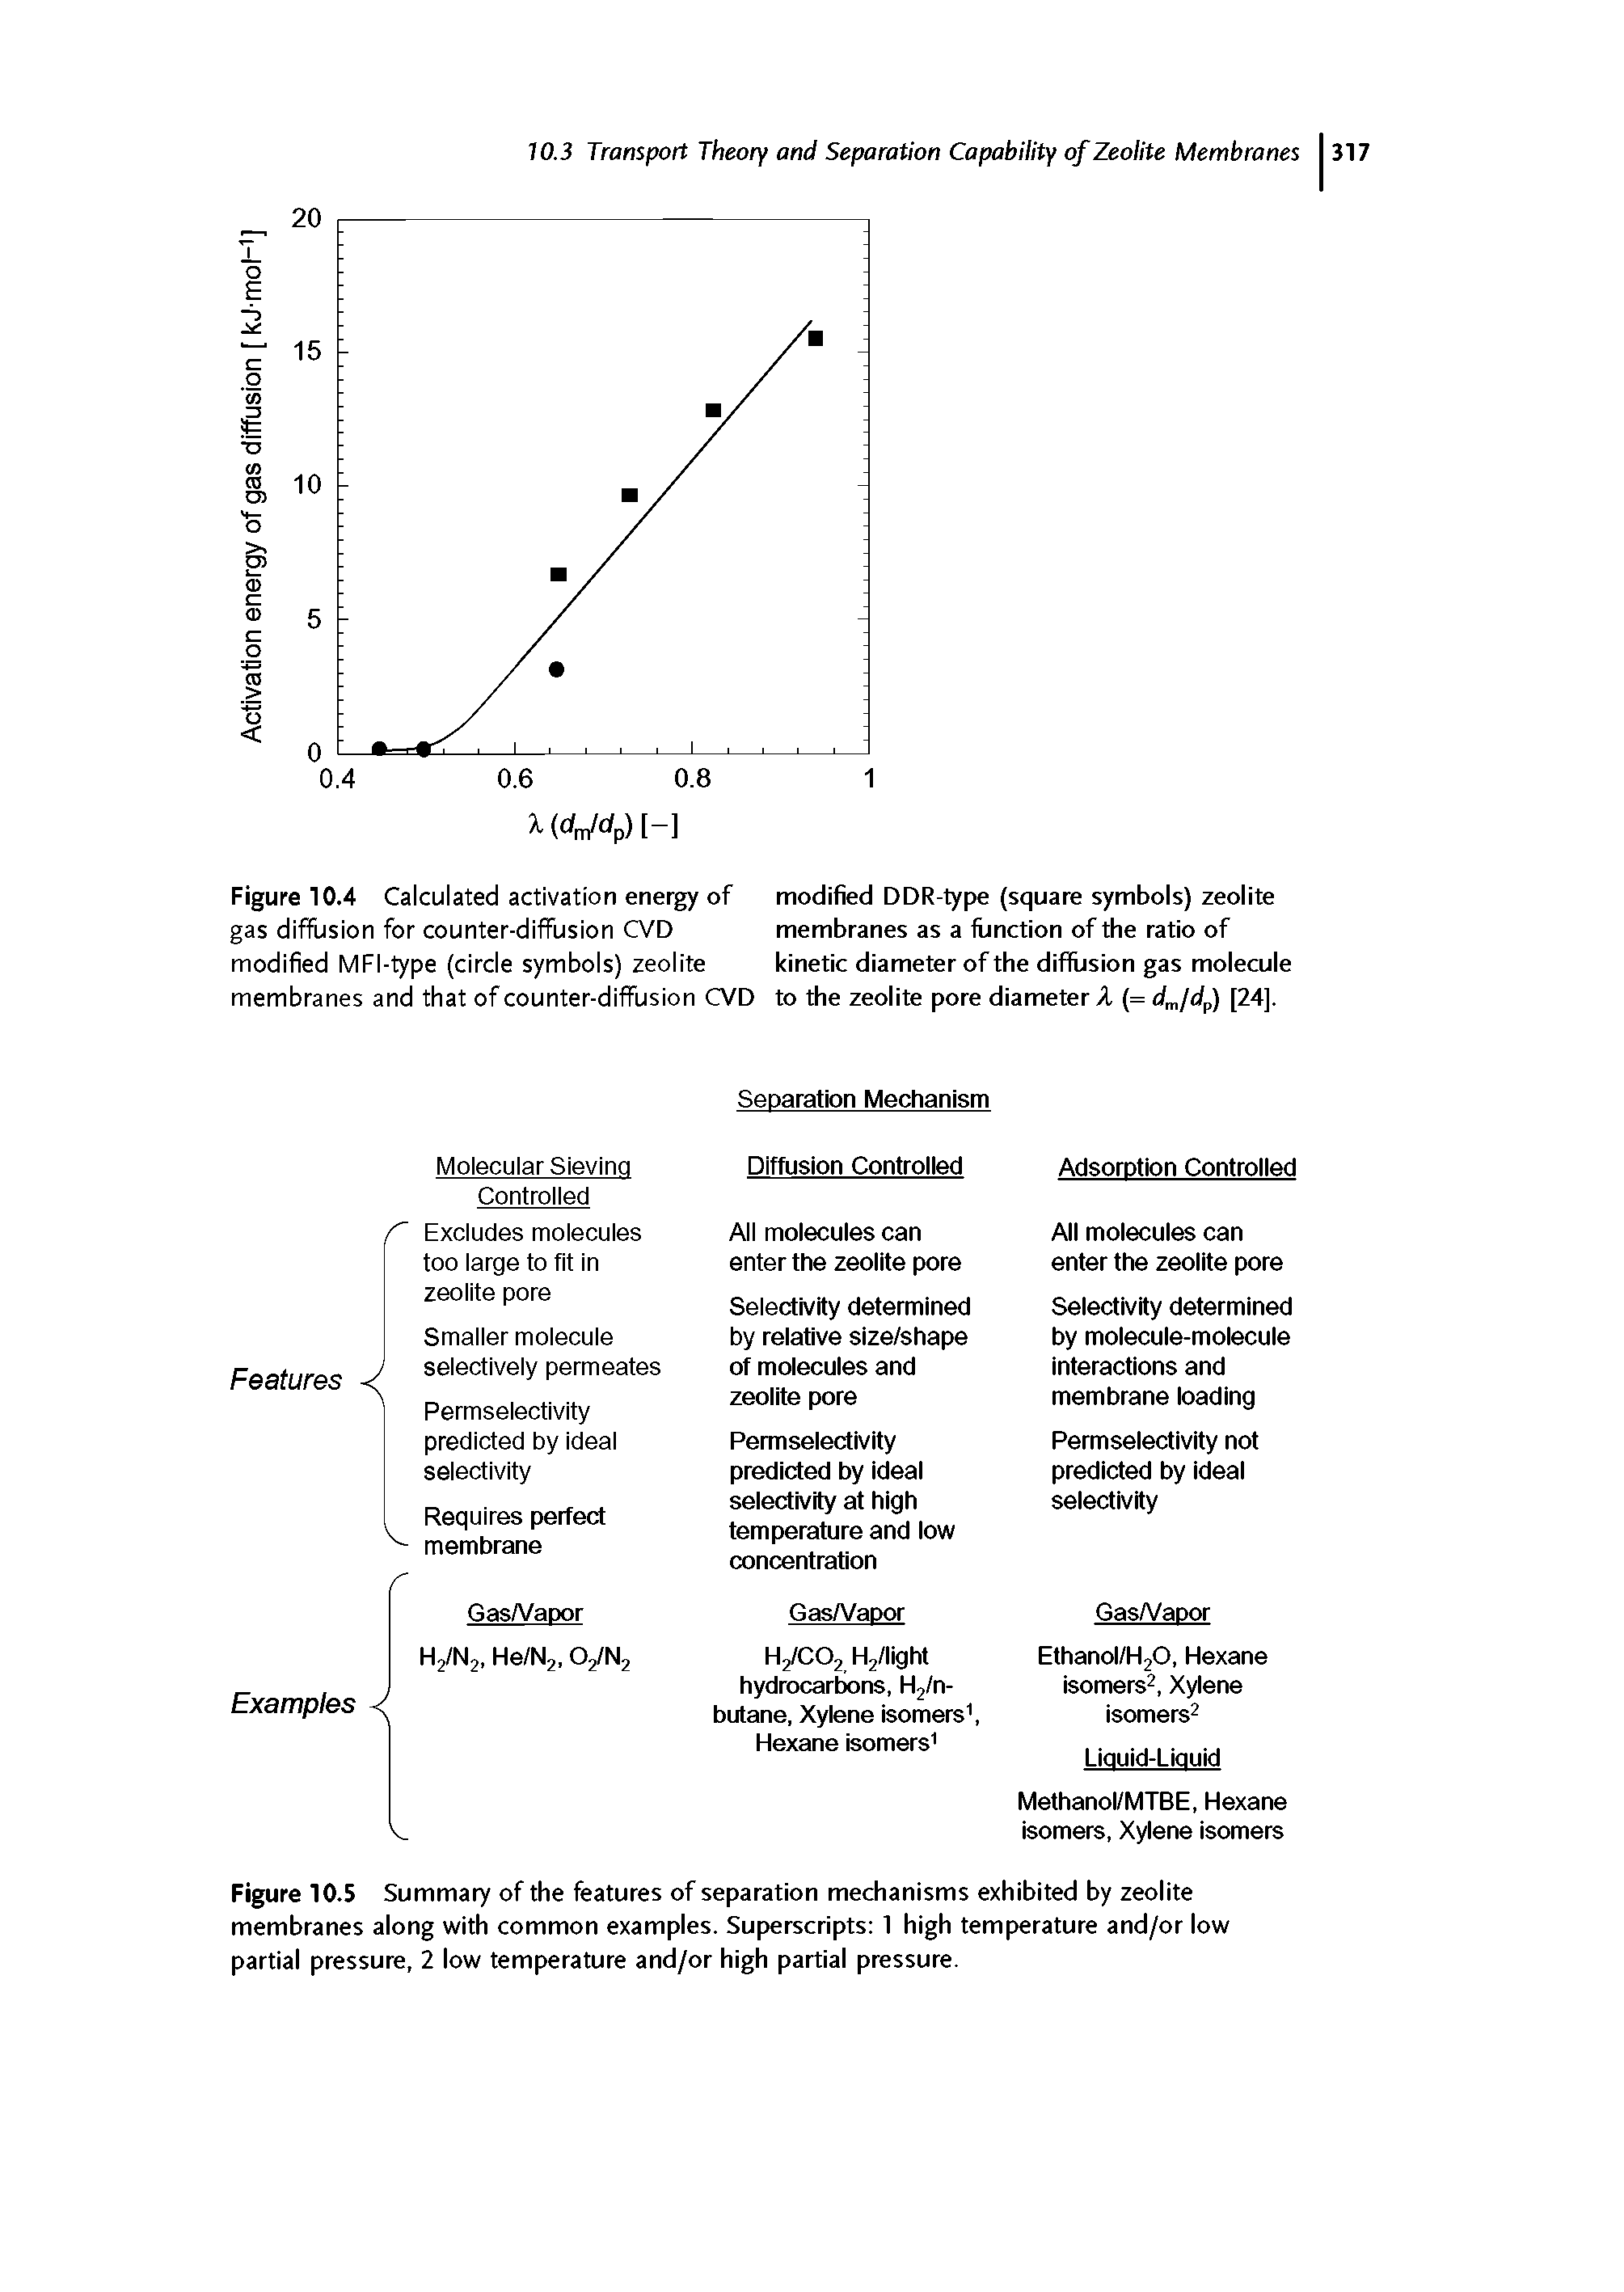 Figure 10.5 Summary of the features of separation mechanisms exhibited by zeolite membranes along with common examples. Superscripts 1 high temperature and/or low partial pressure, 2 low temperature and/or high partial pressure.